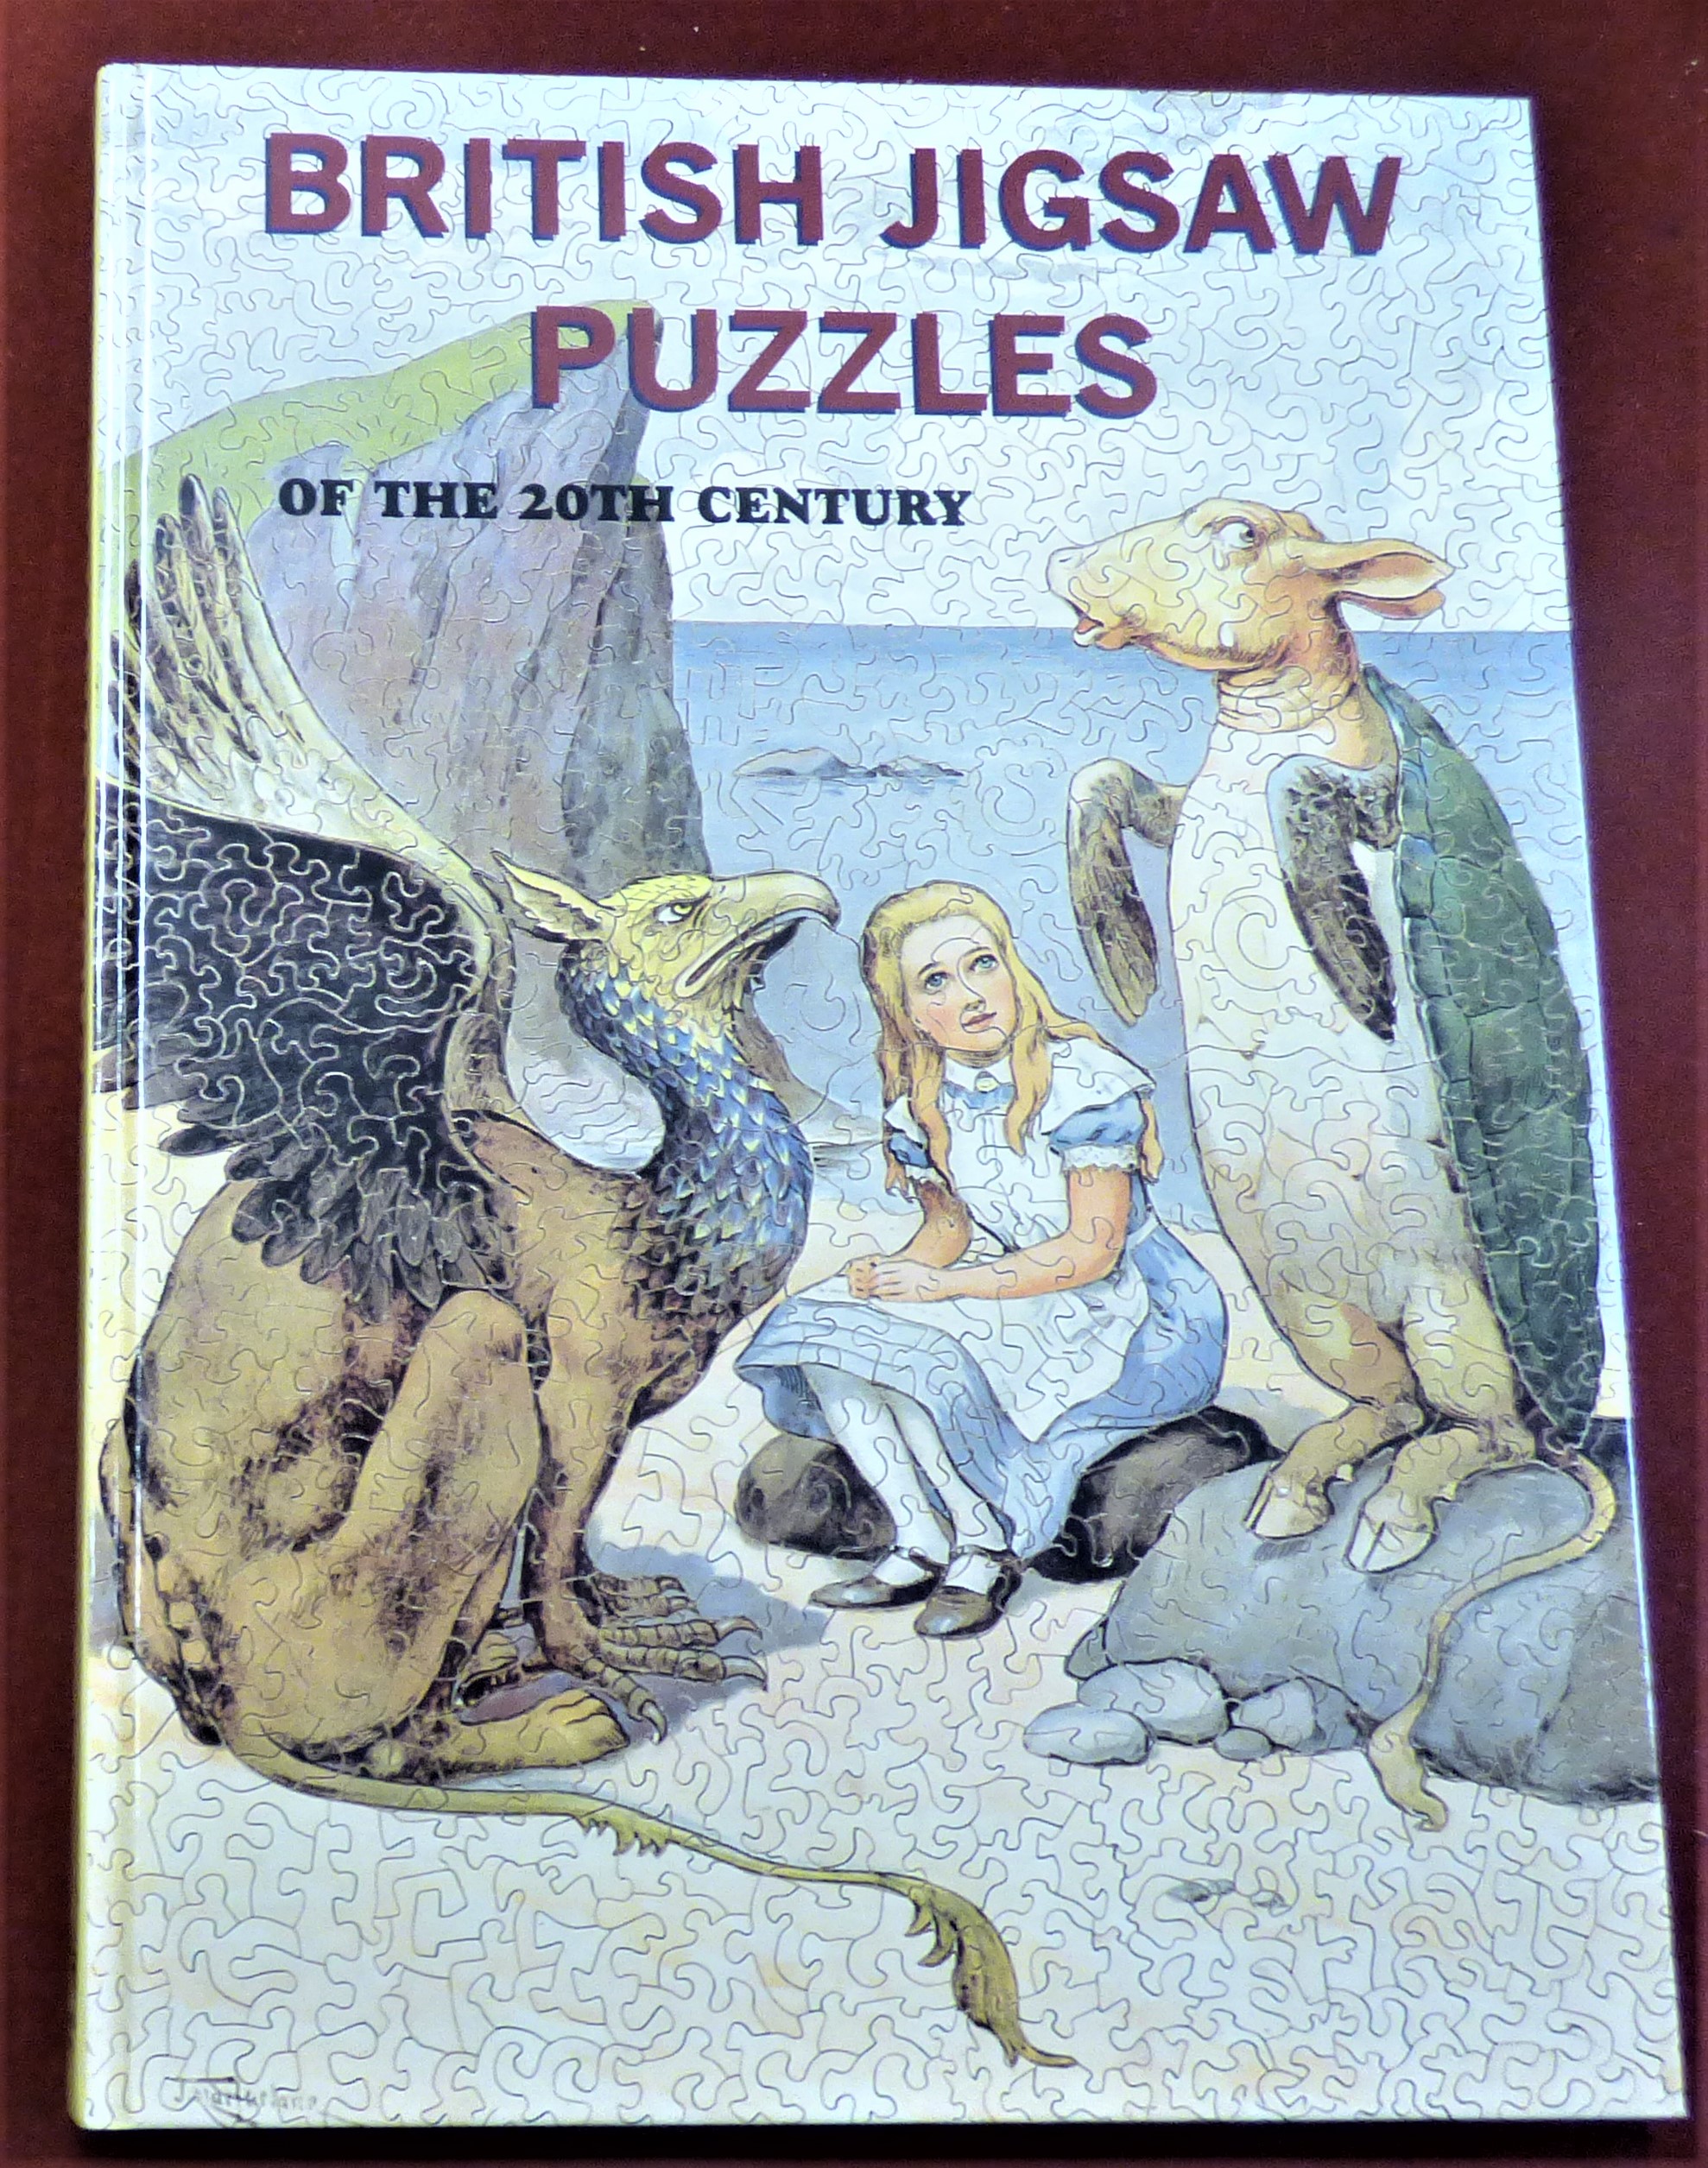 Jigsaw Puzzles - British Jigsaw Puzzles of the 20th Century by Tom Tyler in very good condition.